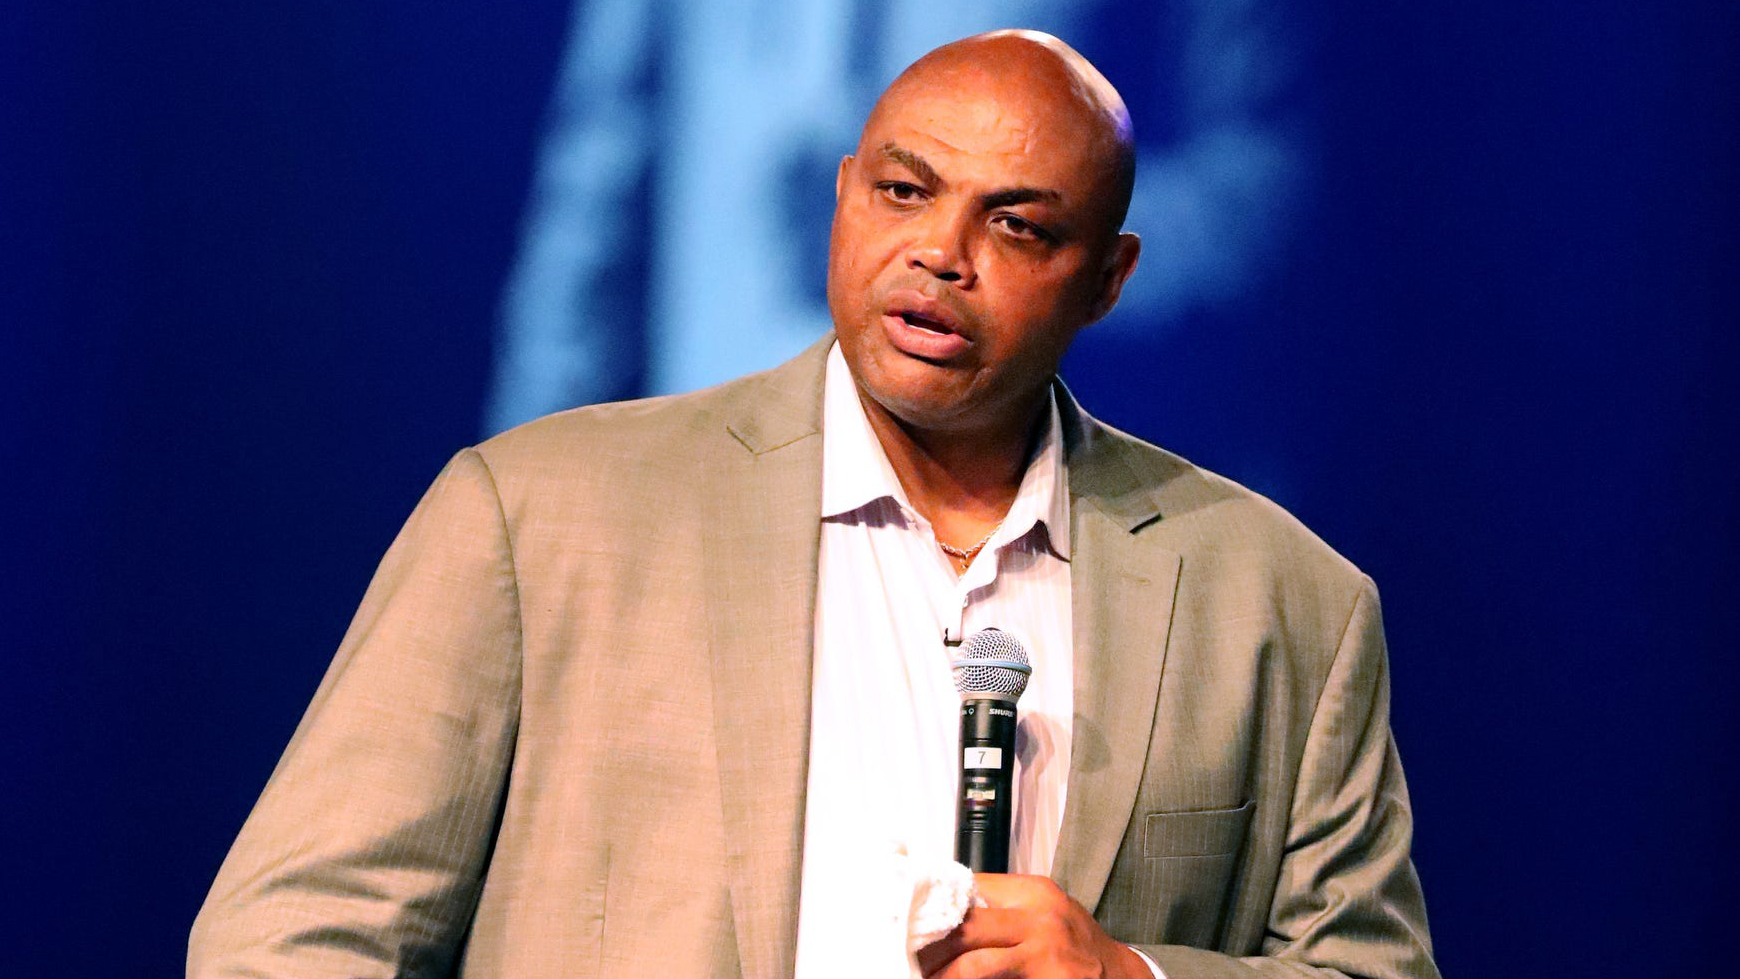 Charles Barkley Says Of 1984 Draft Day Suit: “Burgundy was my favorite  color” - The Source